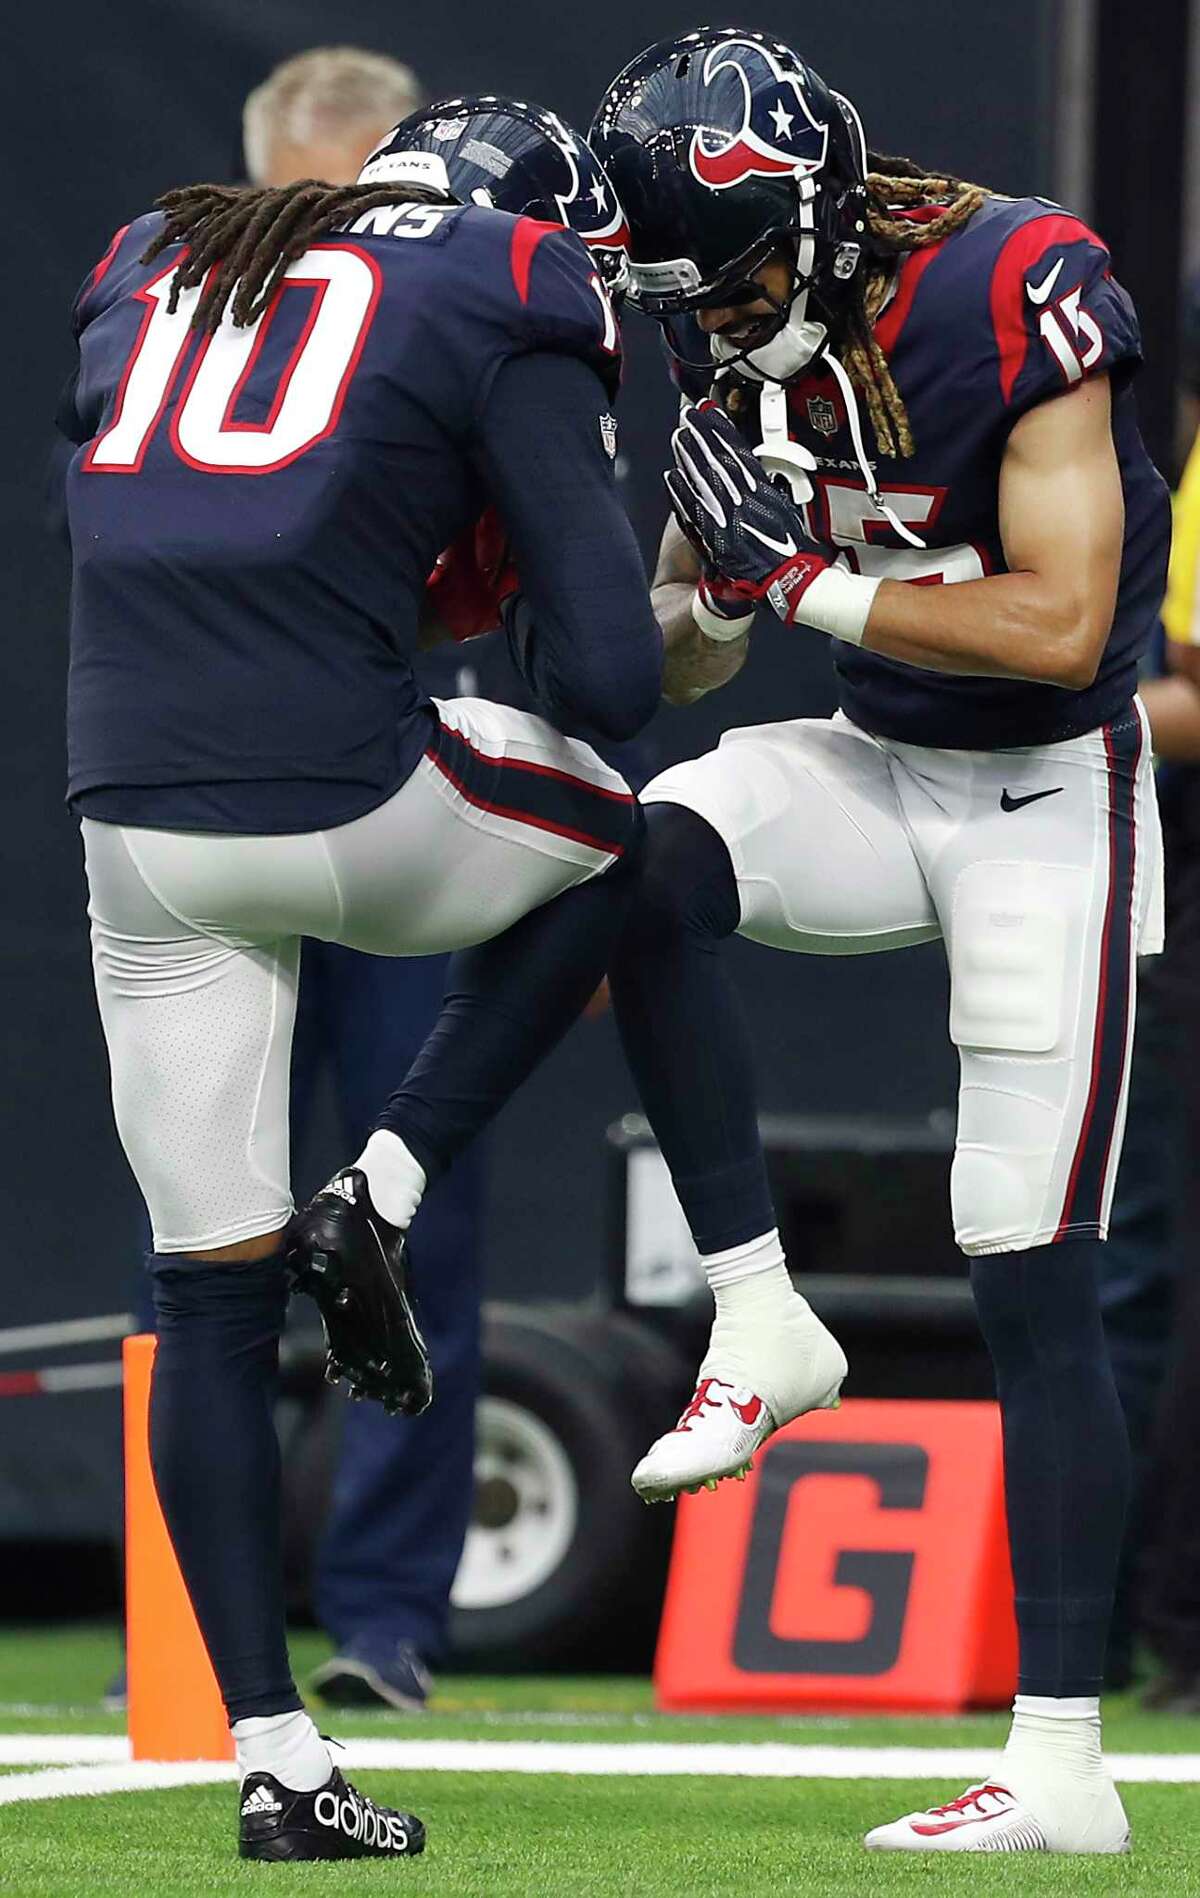 Texans wide receiver DeAndre Hopkins, left, was definitely happy to see the return of Will Fuller in last Sunday's game, a 57-14 win over the Titans.